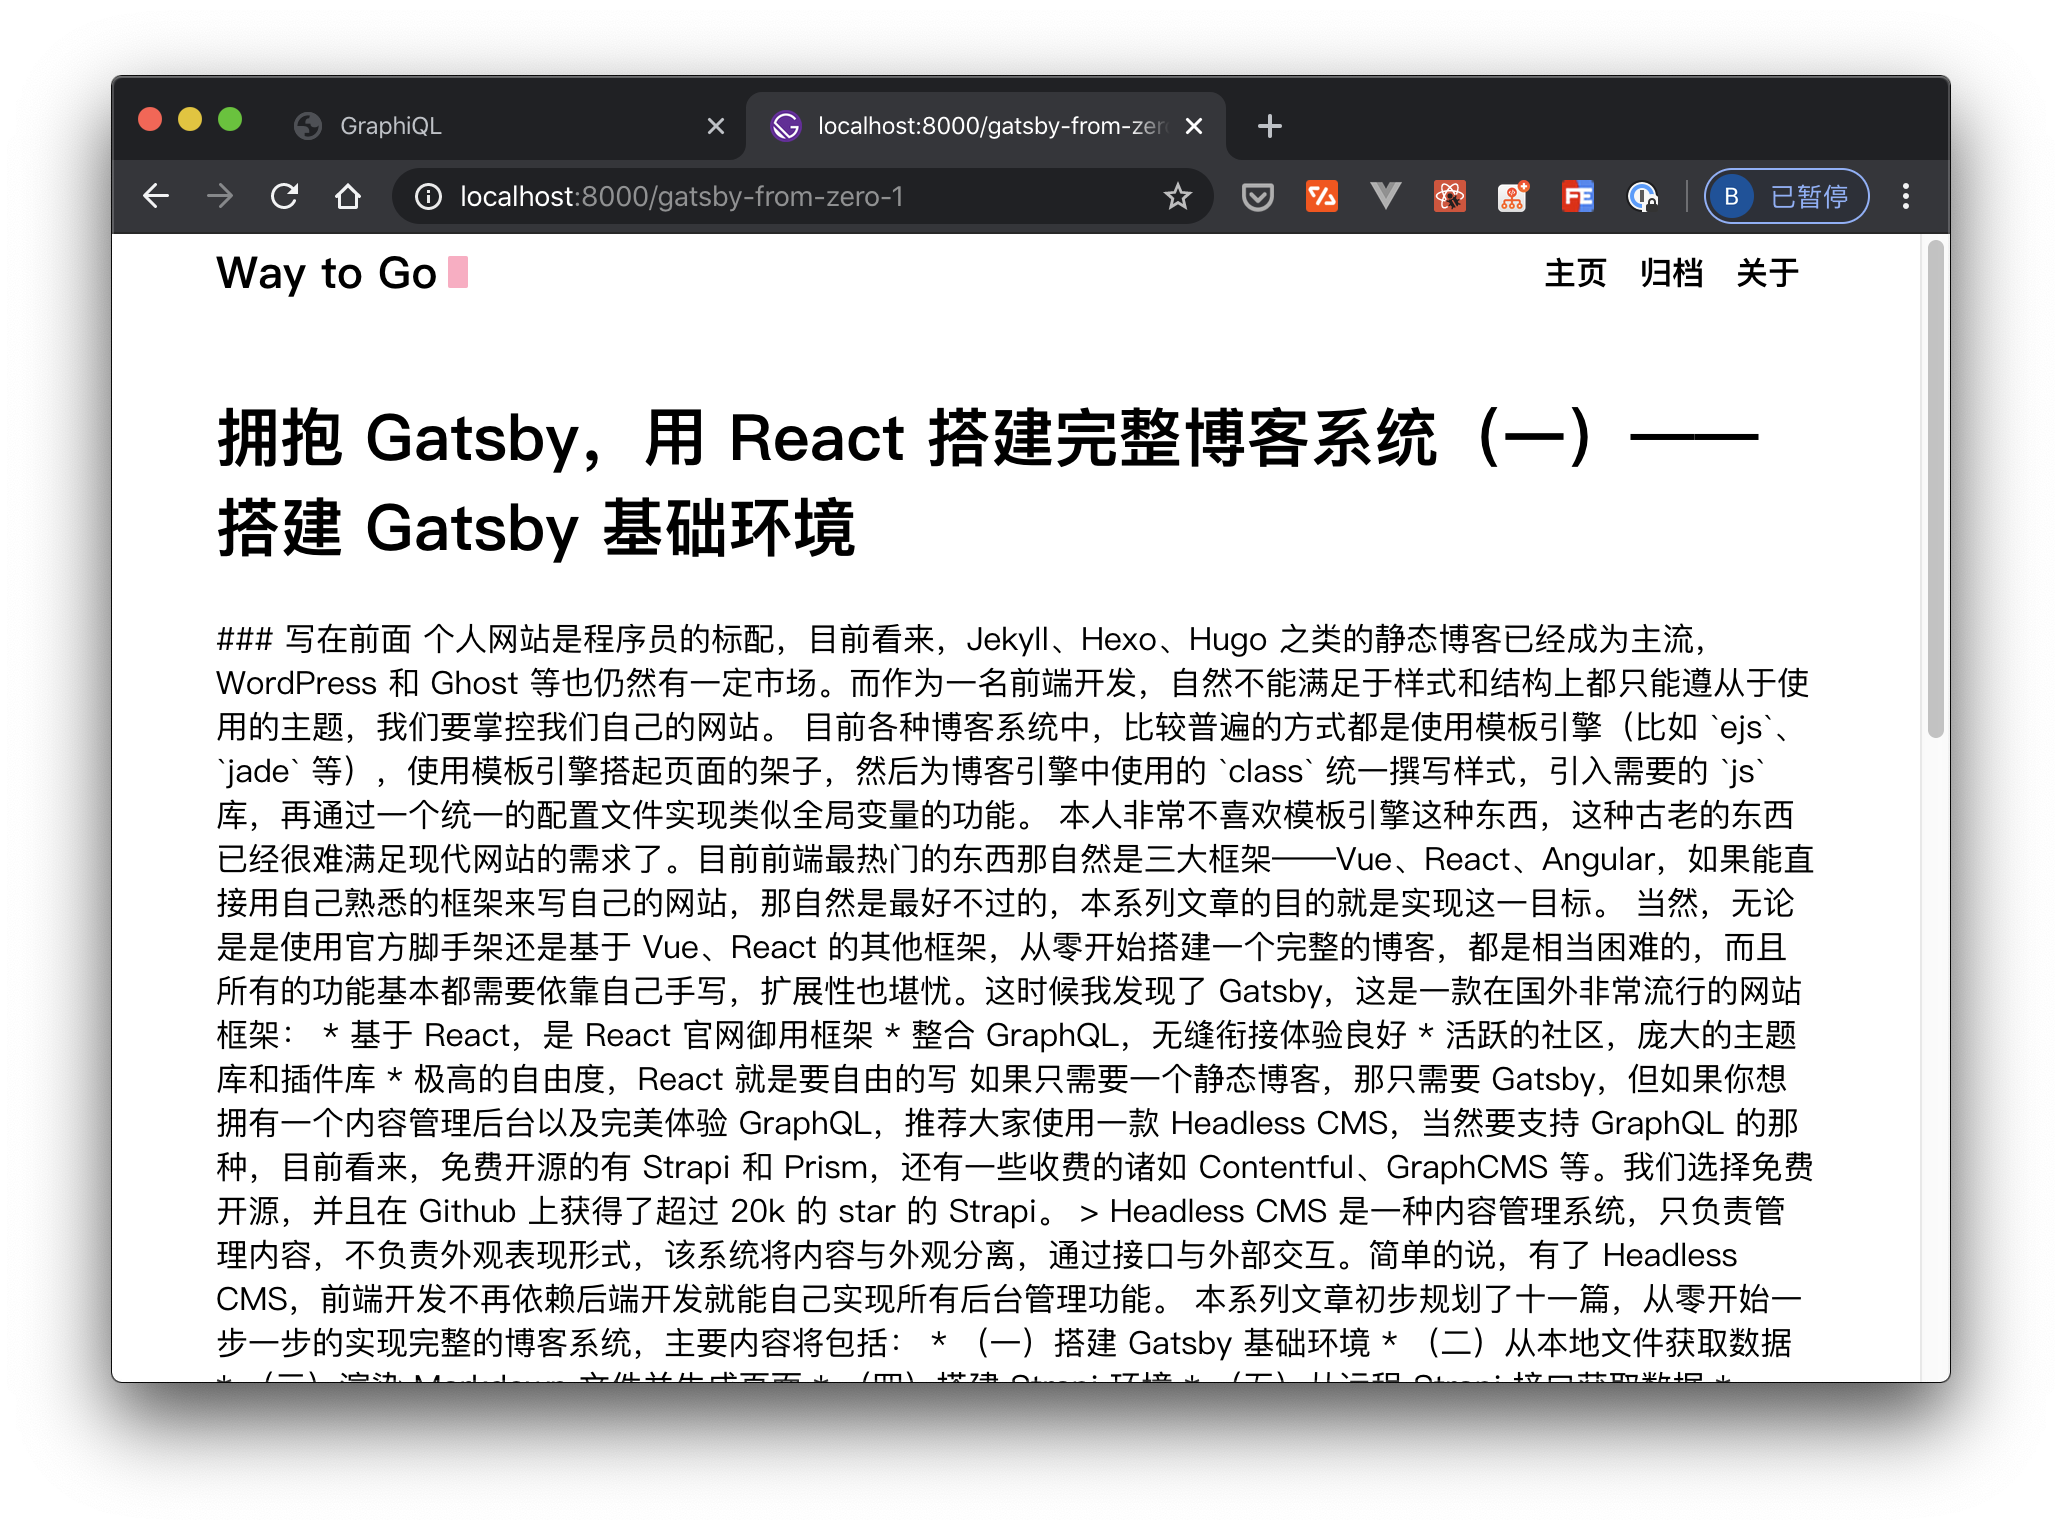 gatsby-from-zero-5-page-no-markdown.png